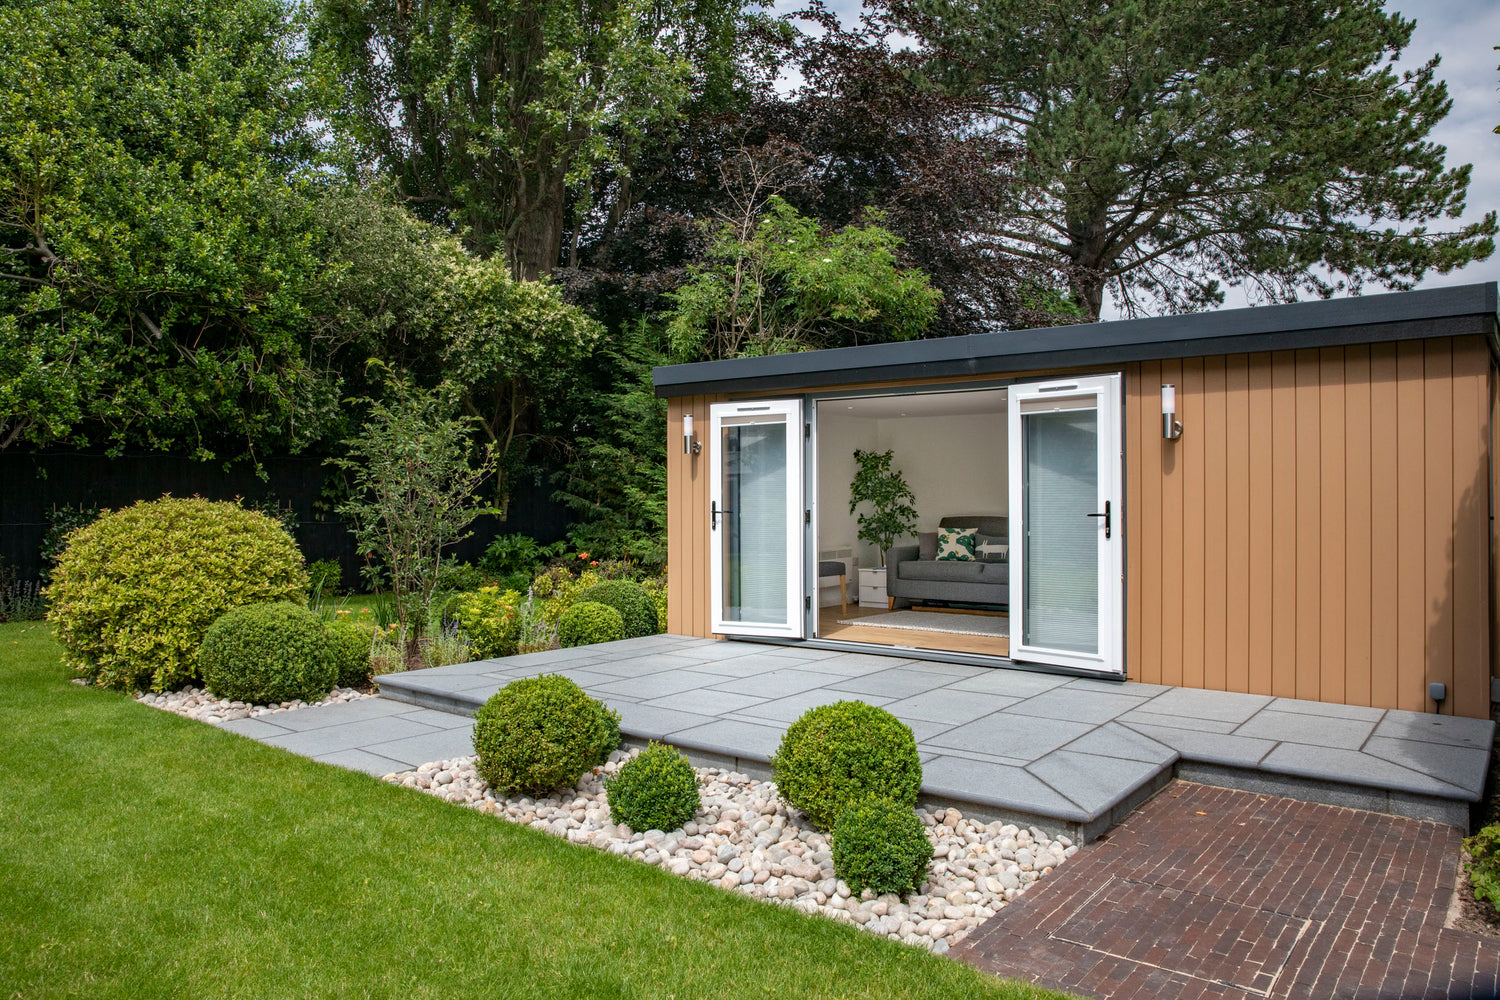 A garden room office in Nantwich with large patio in front